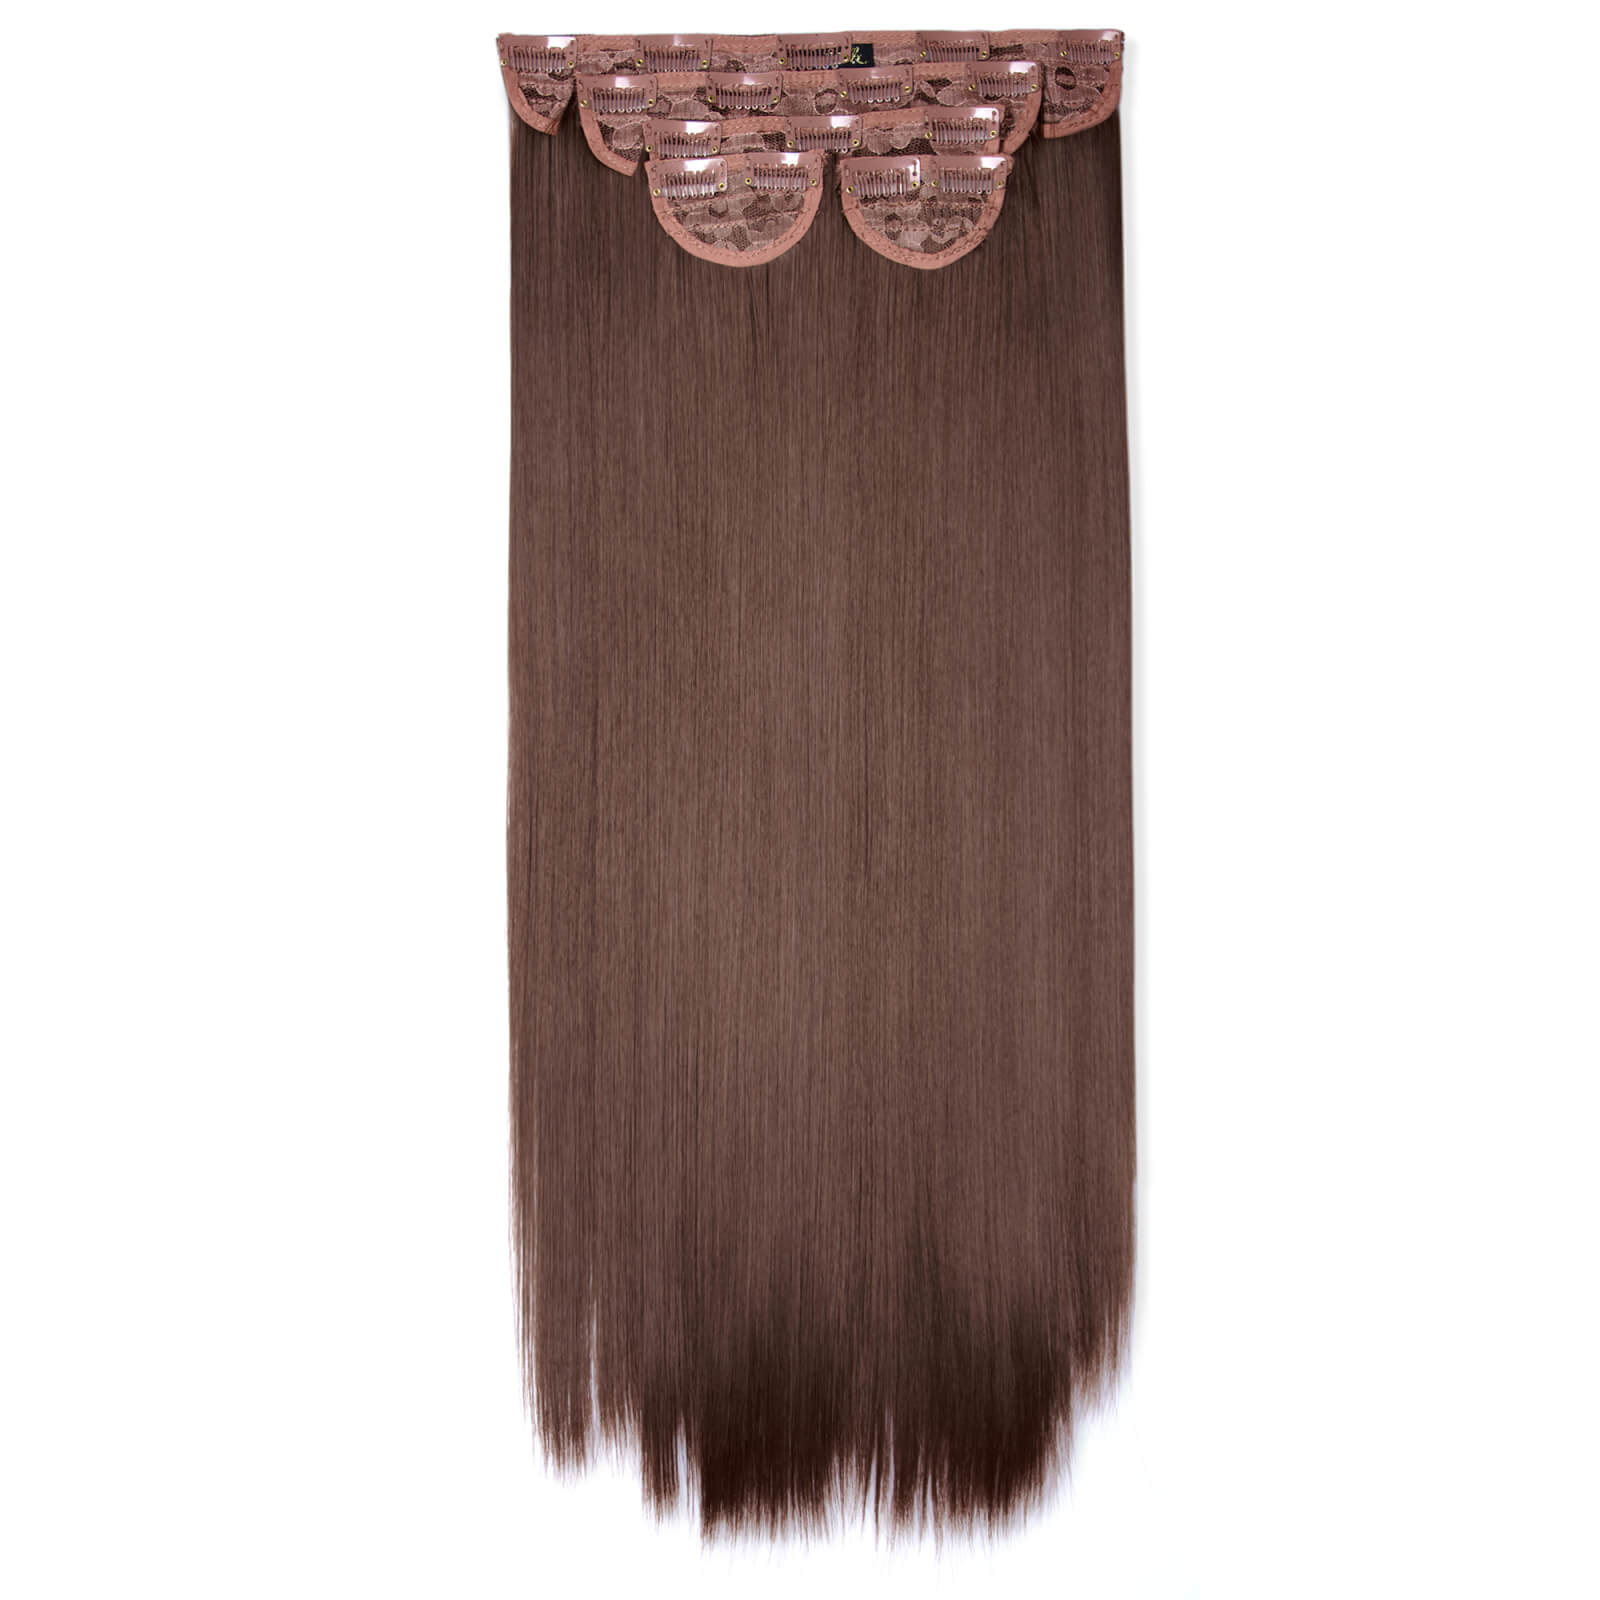 Image of LullaBellz Super Thick 22 5 Piece Straight Clip In Extensions (Various Shades) - Chestnut